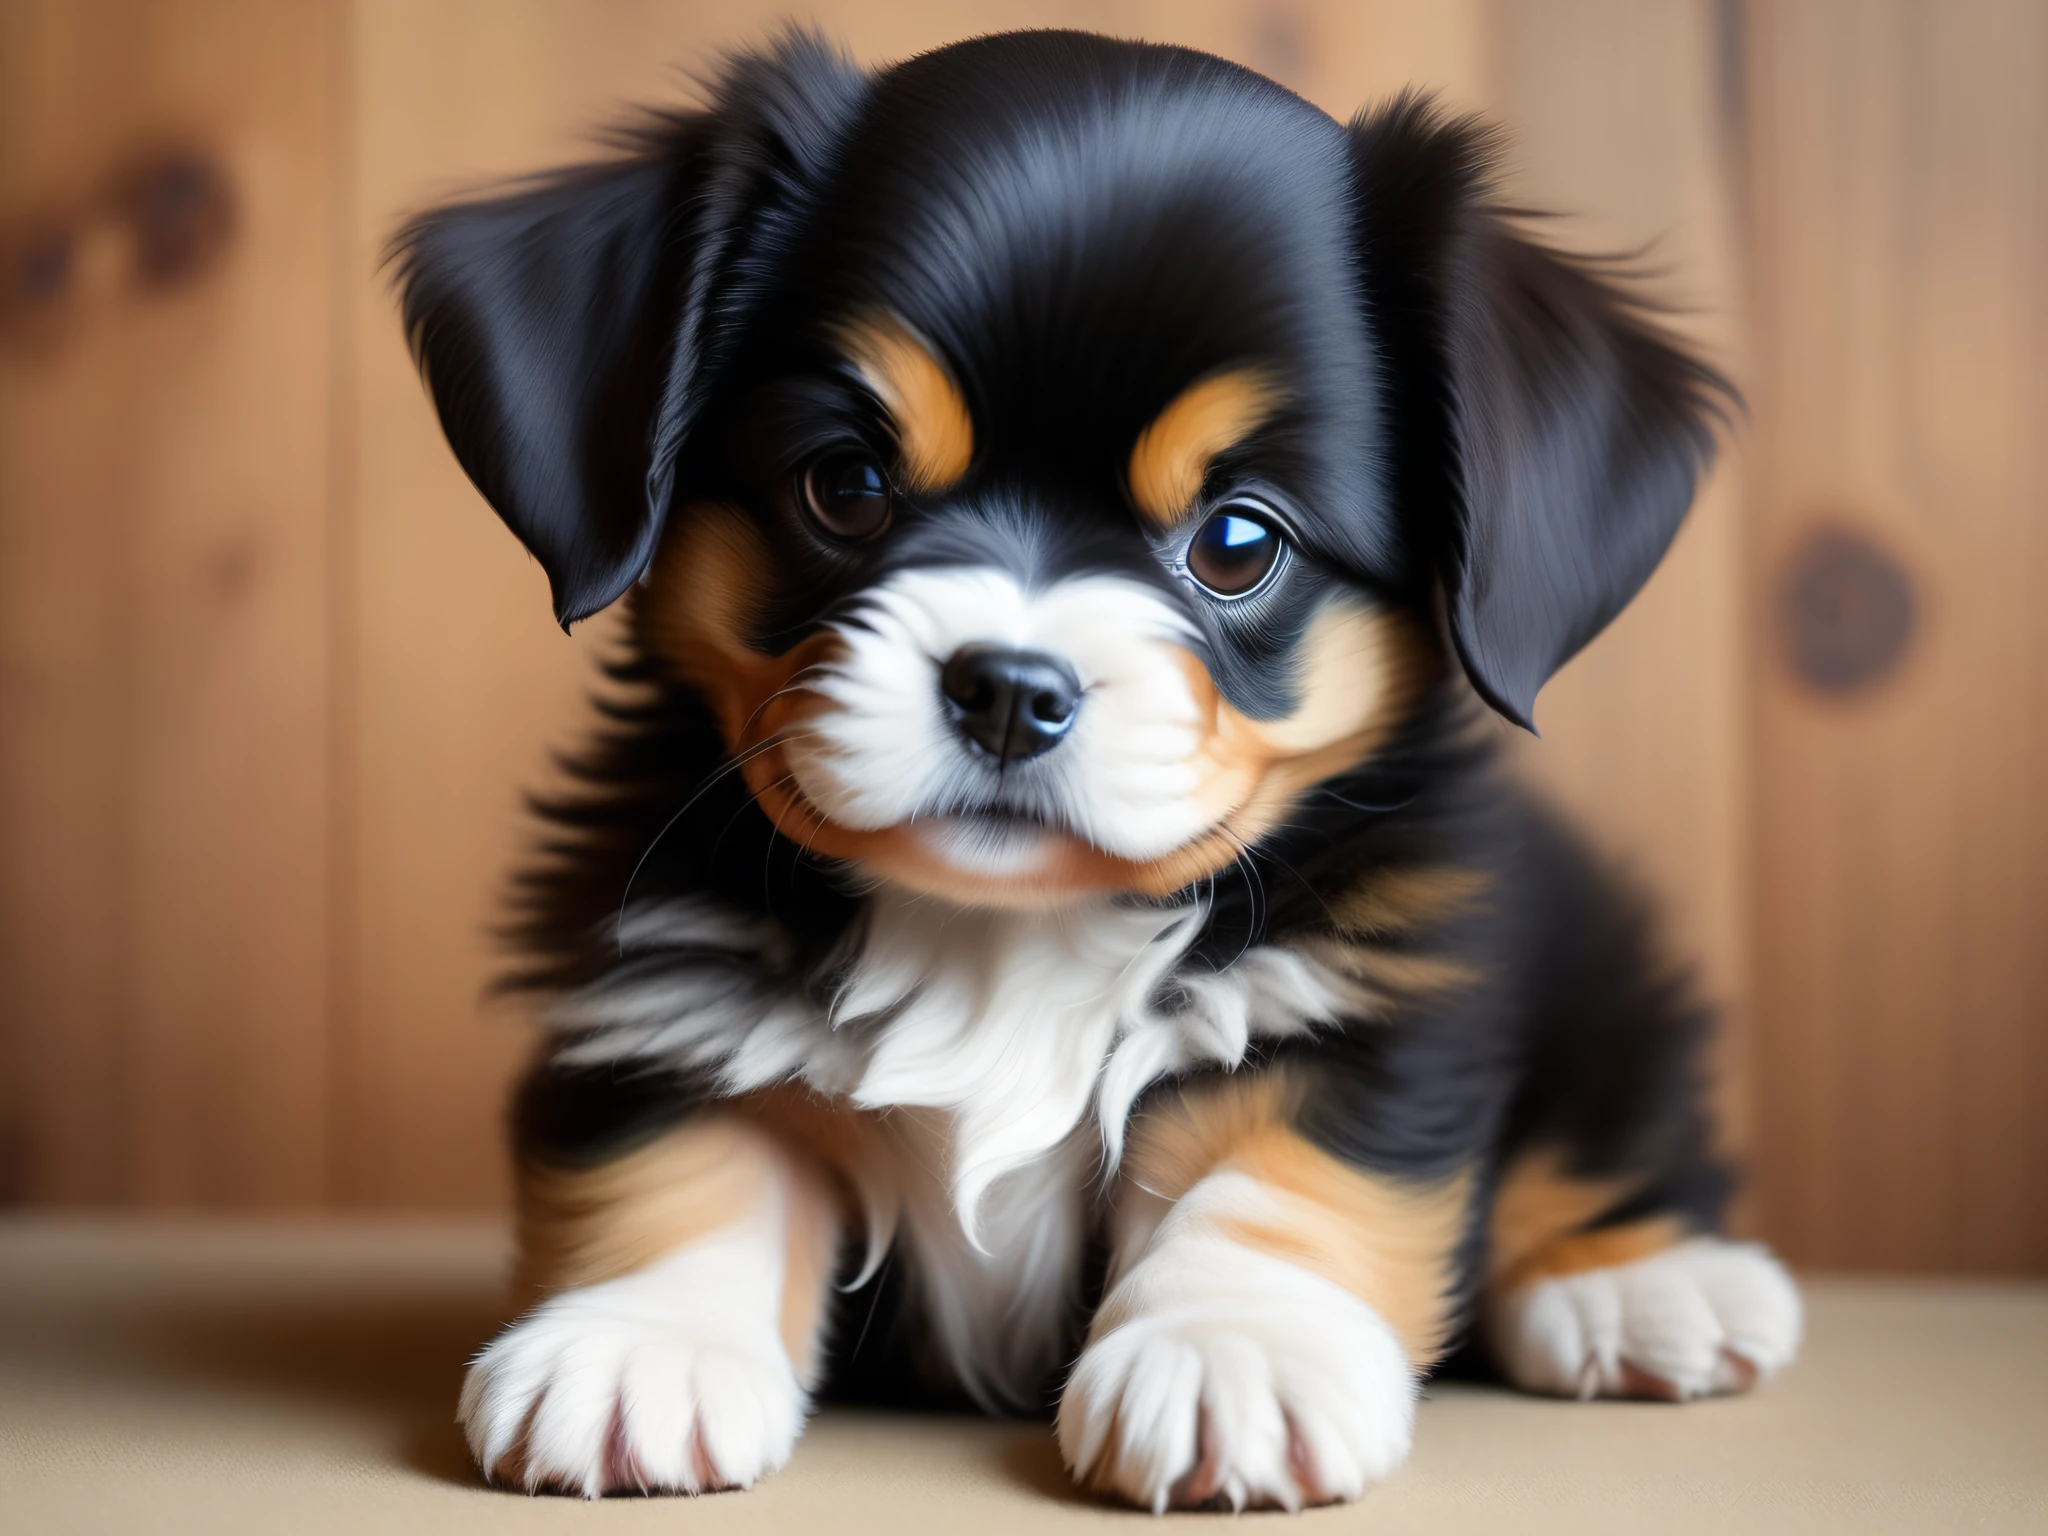 adorable puppy with fluffy fur and round eyes